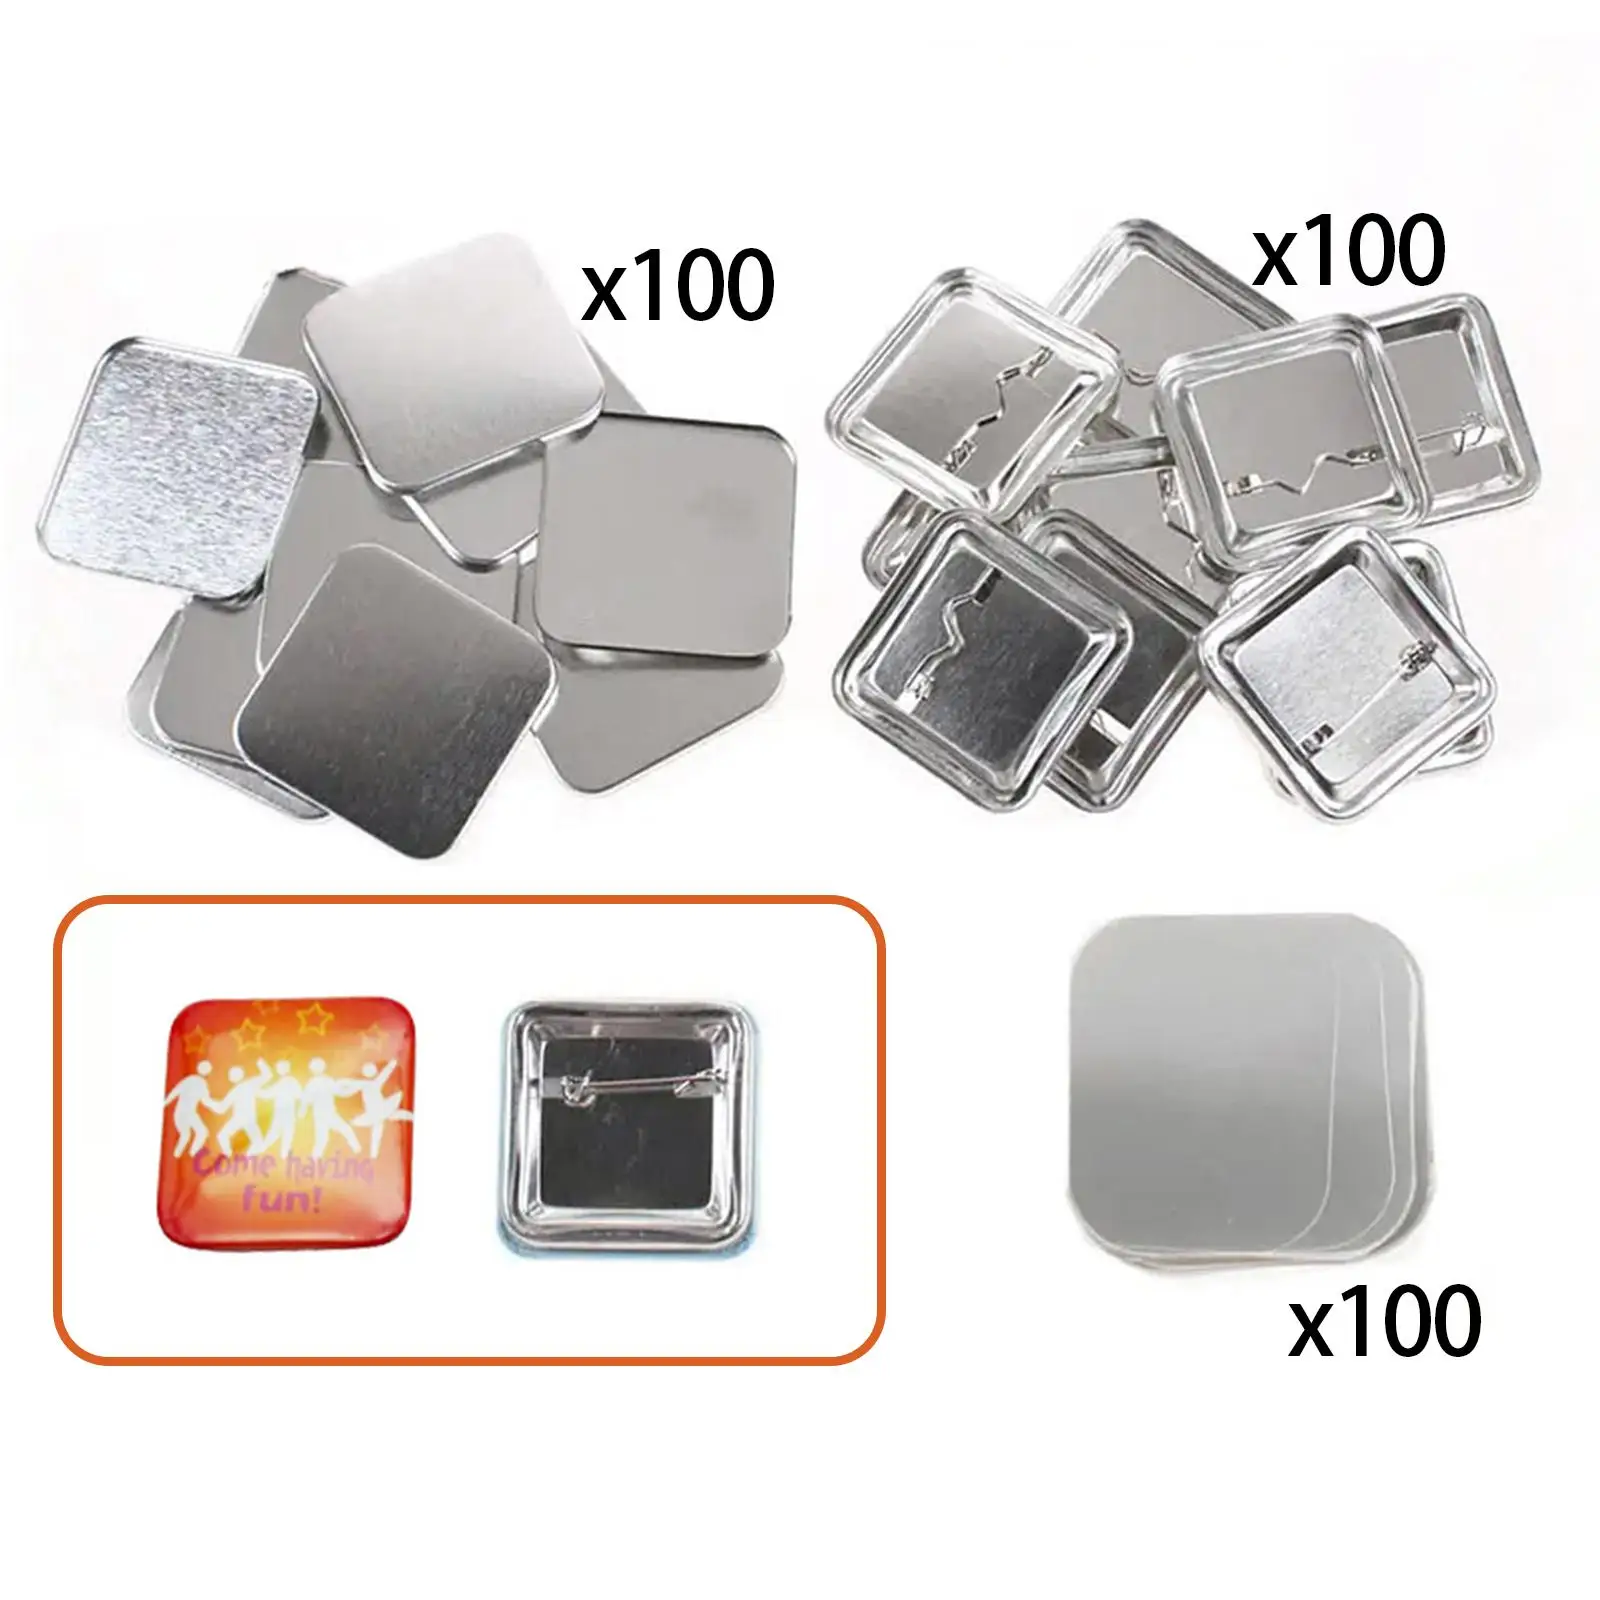 100Sets Blank Button Badge Parts Component Material Metal Button Badge Kit for DIY Souvenirs Crafting Presents Jewelry Making